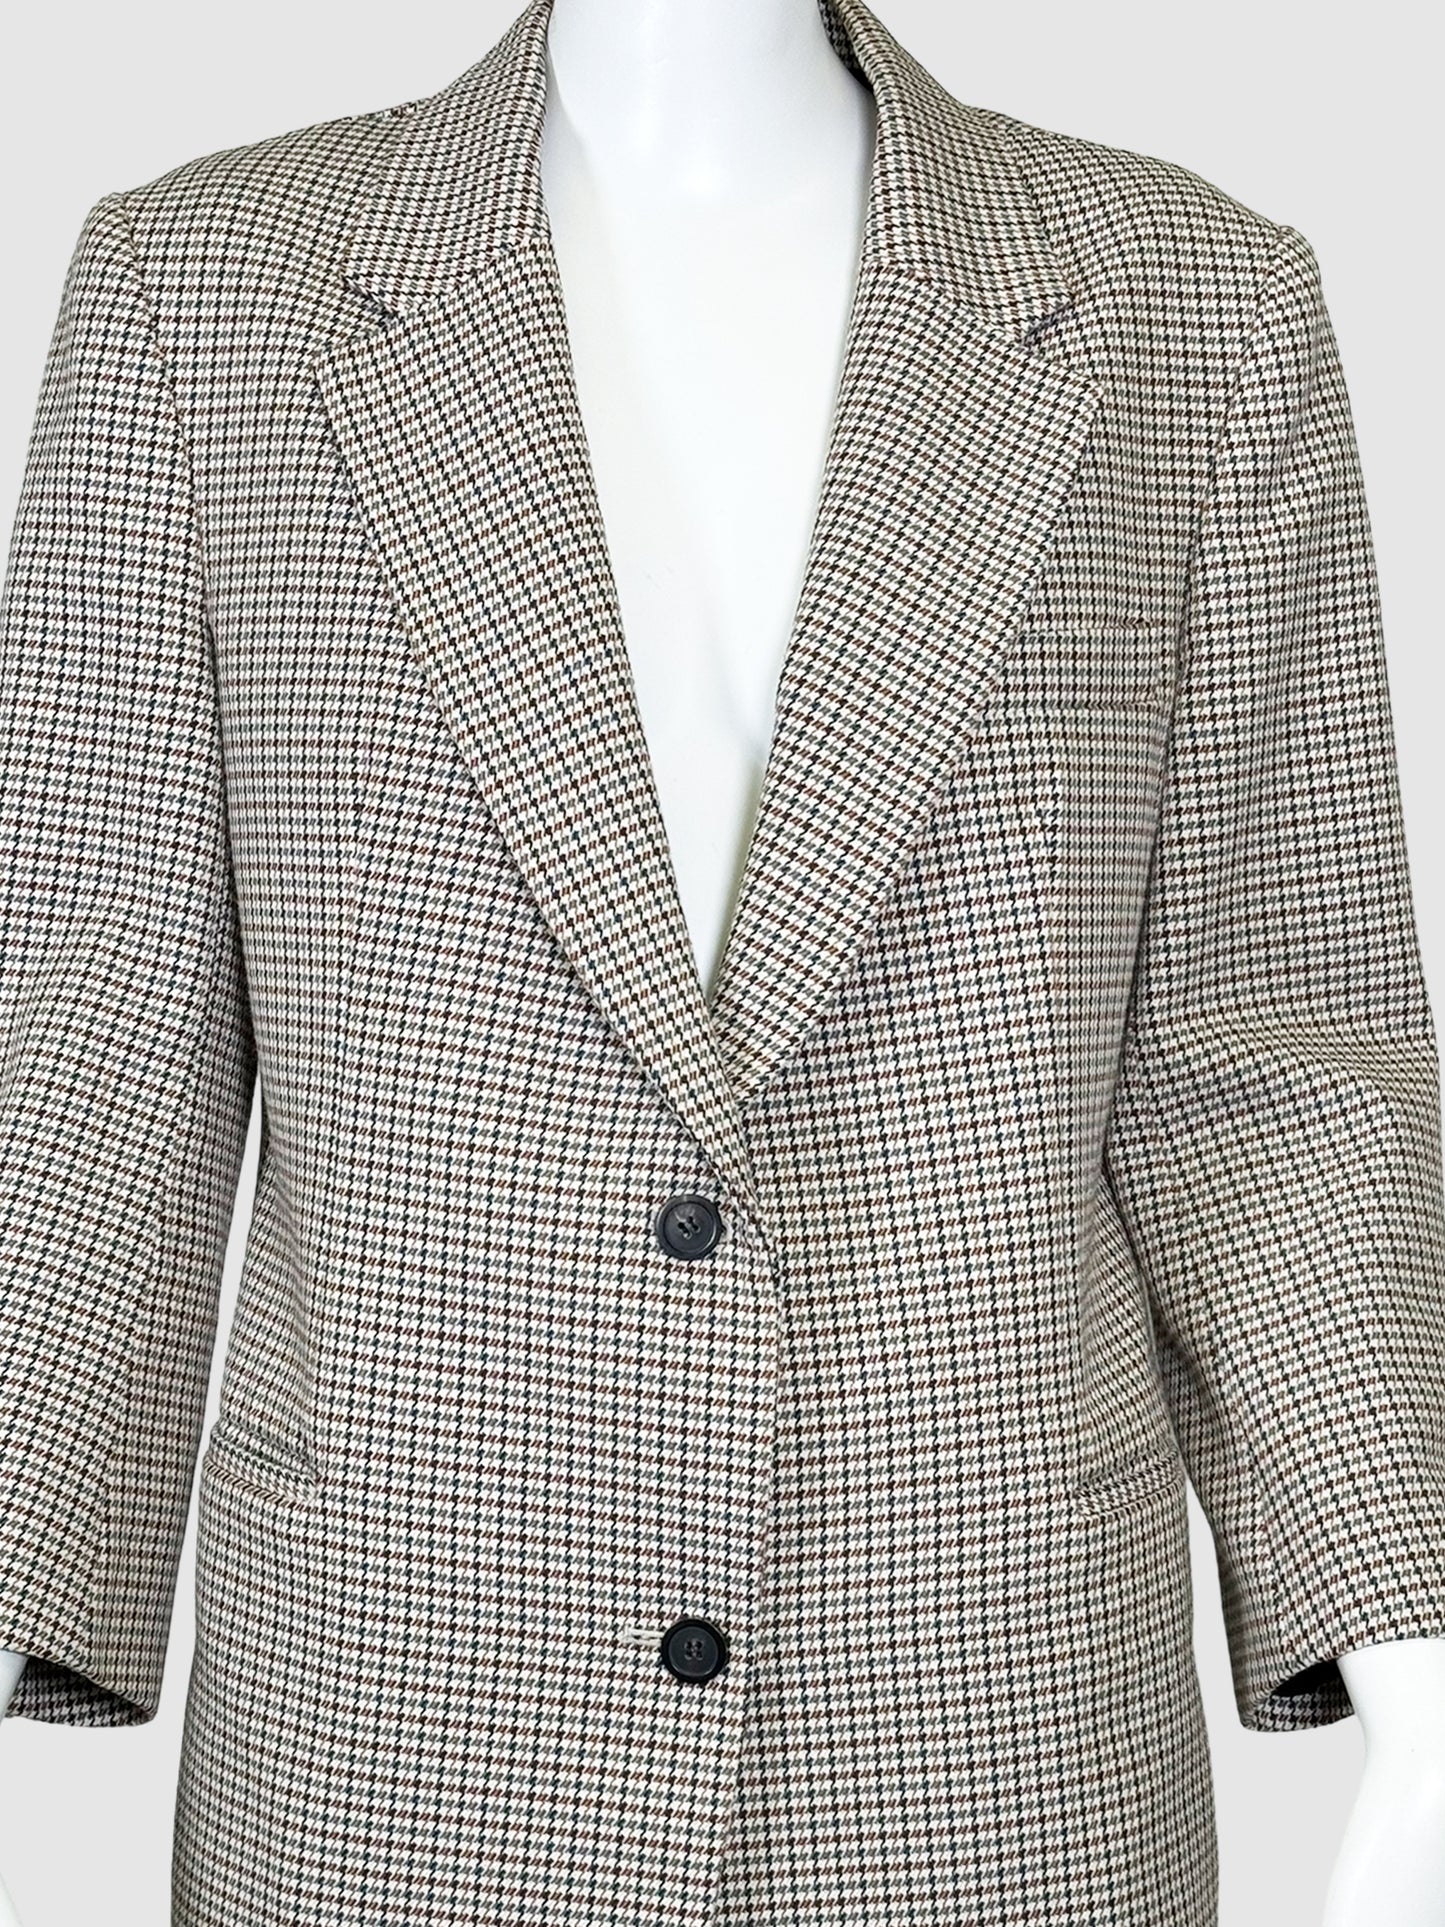 Houndstooth Single-Breasted Blazer - Size 12